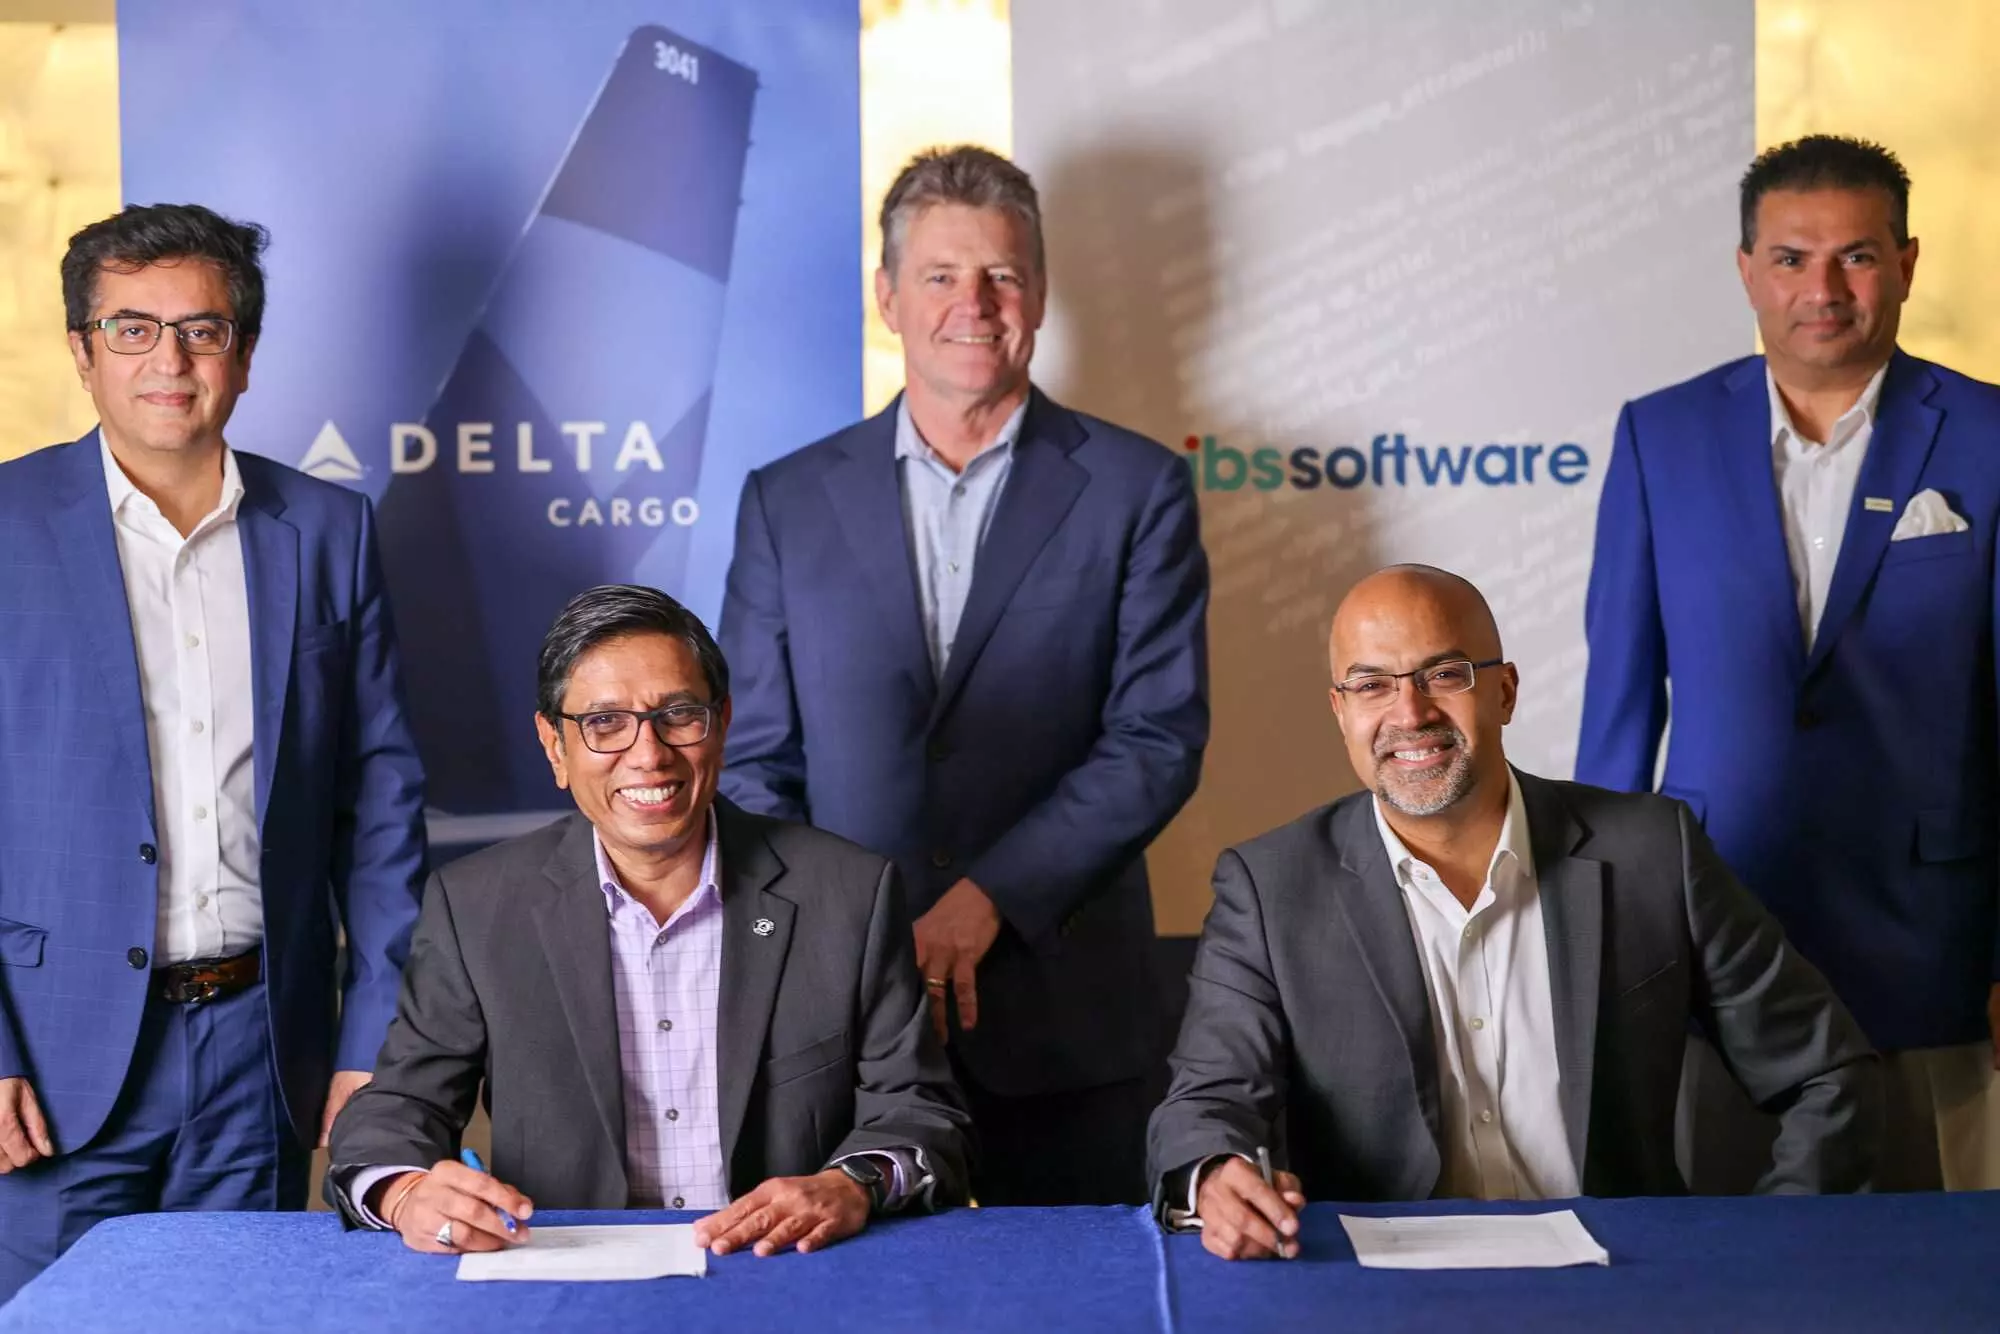 Delta Cargo selects IBS Software to power digital transformation